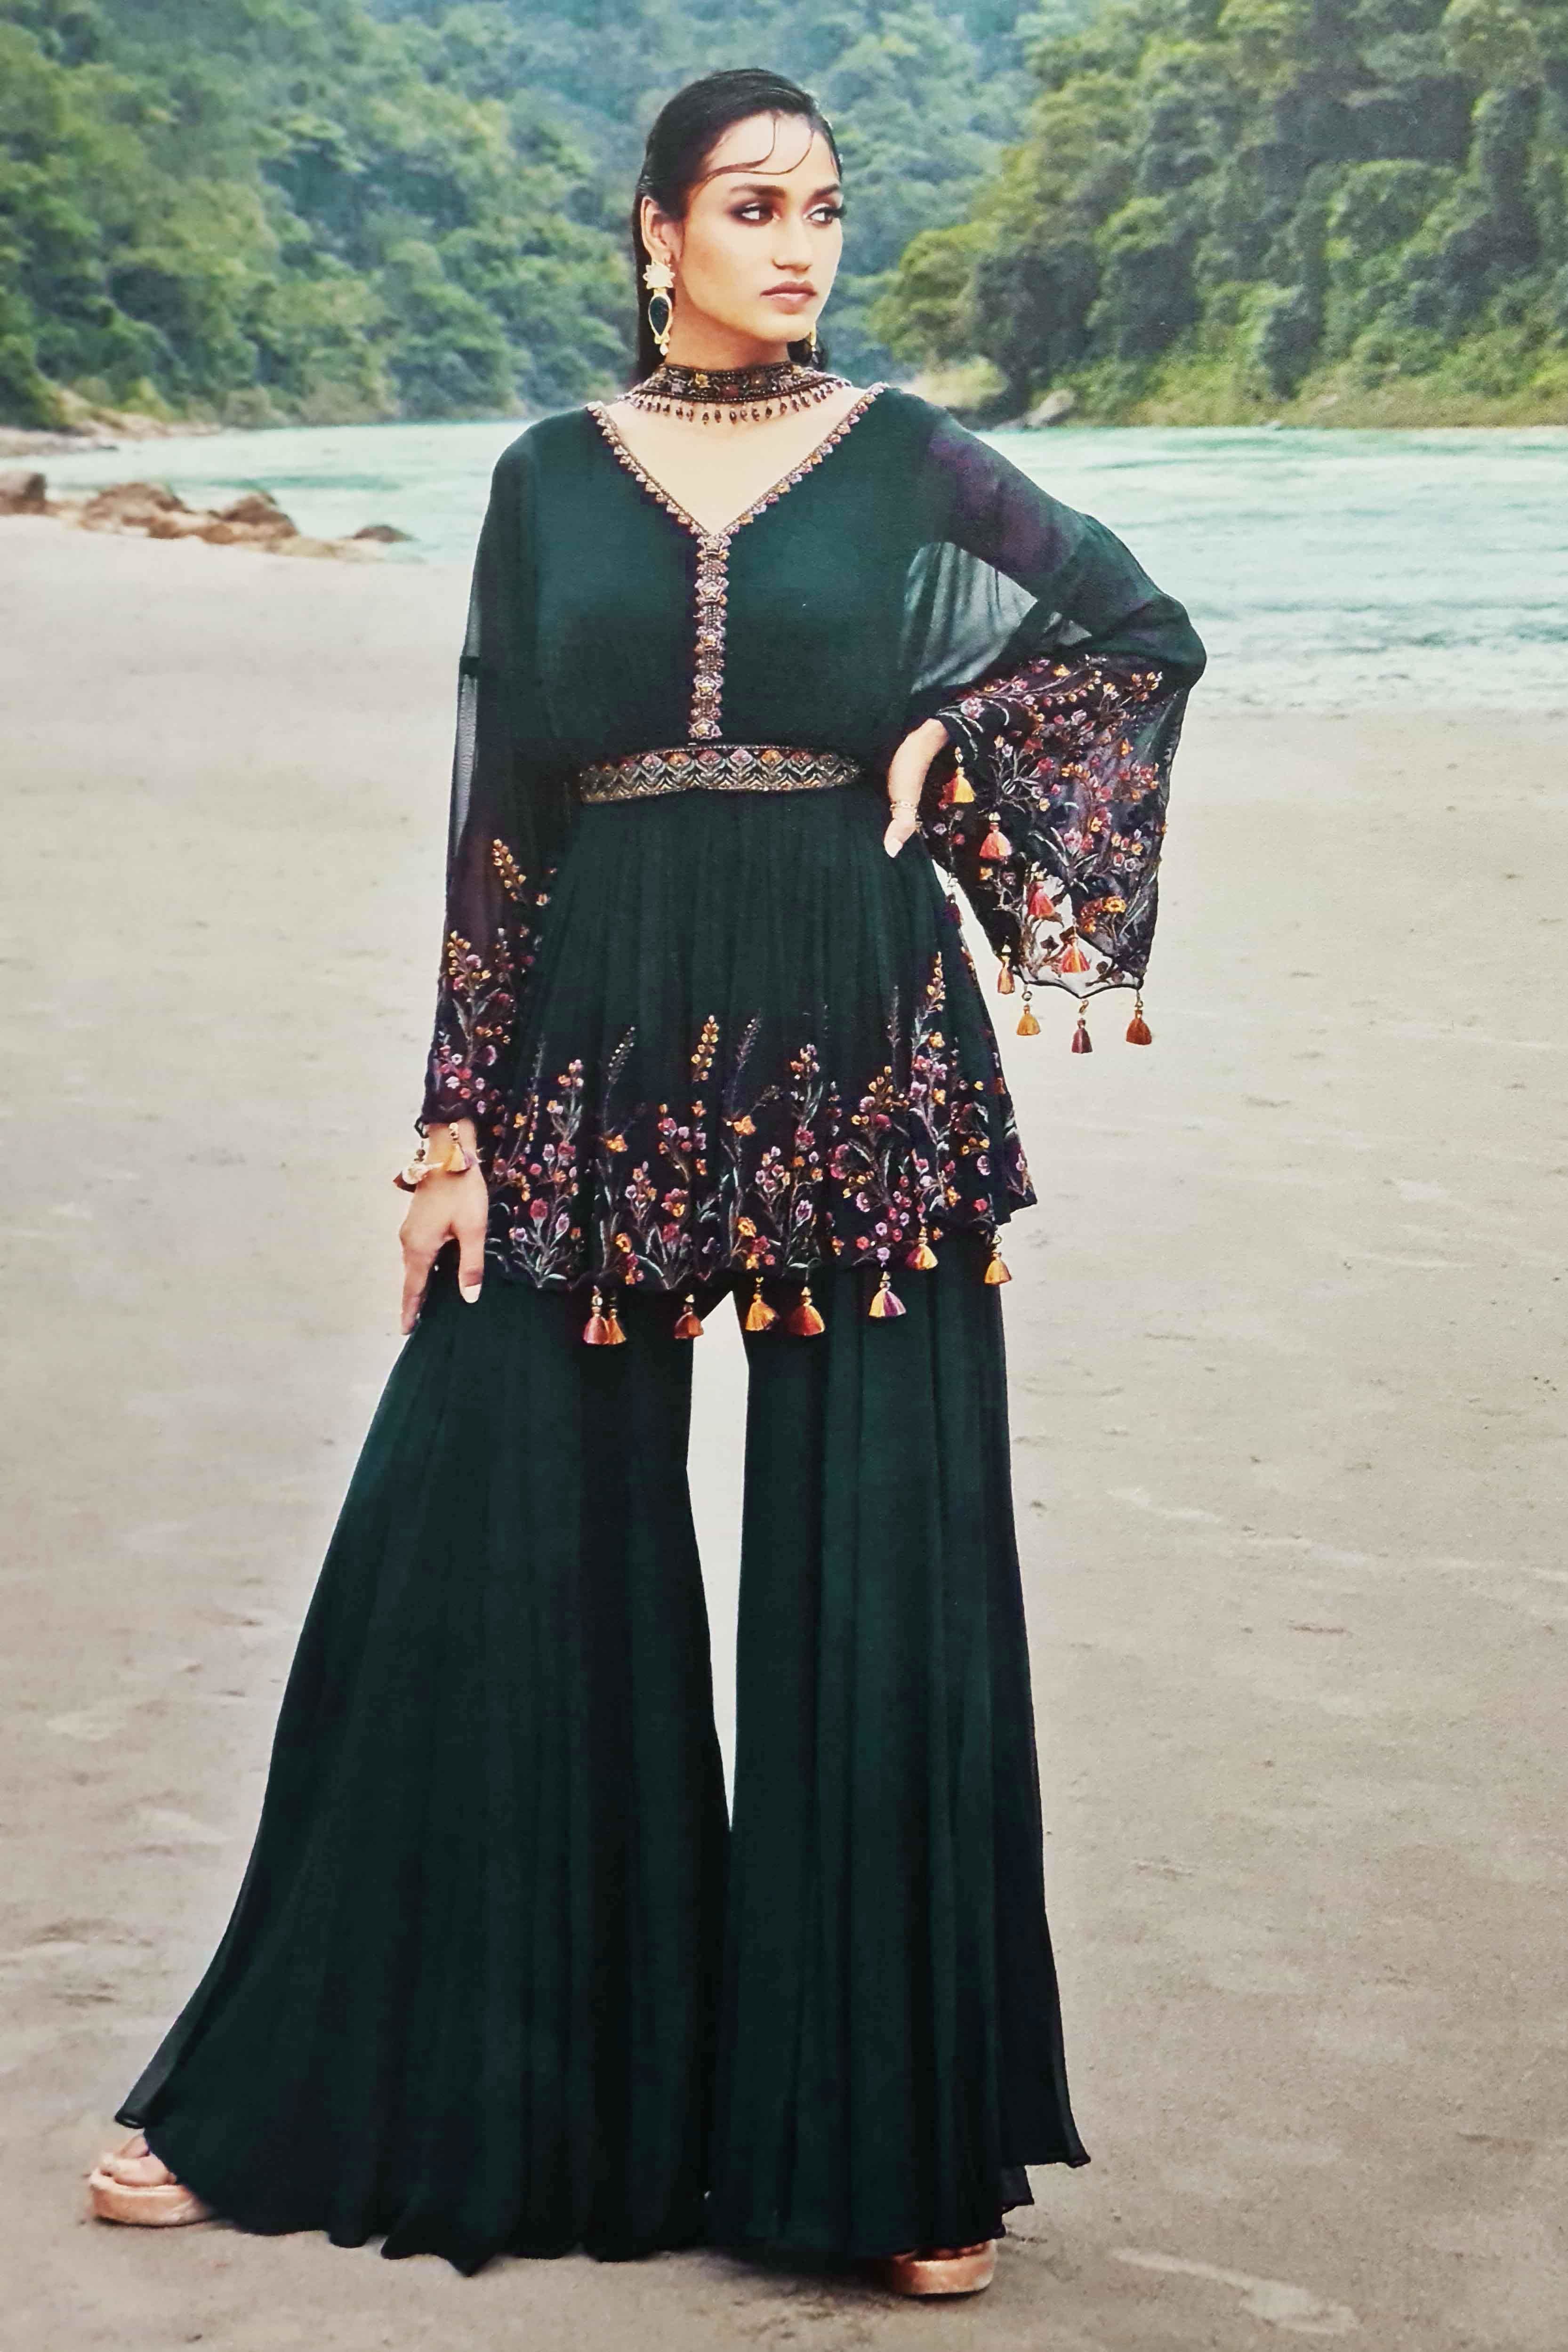 Churidar Suit in Peacock Green Color ($109) | Fashion, Partywear, Ethnic  dress